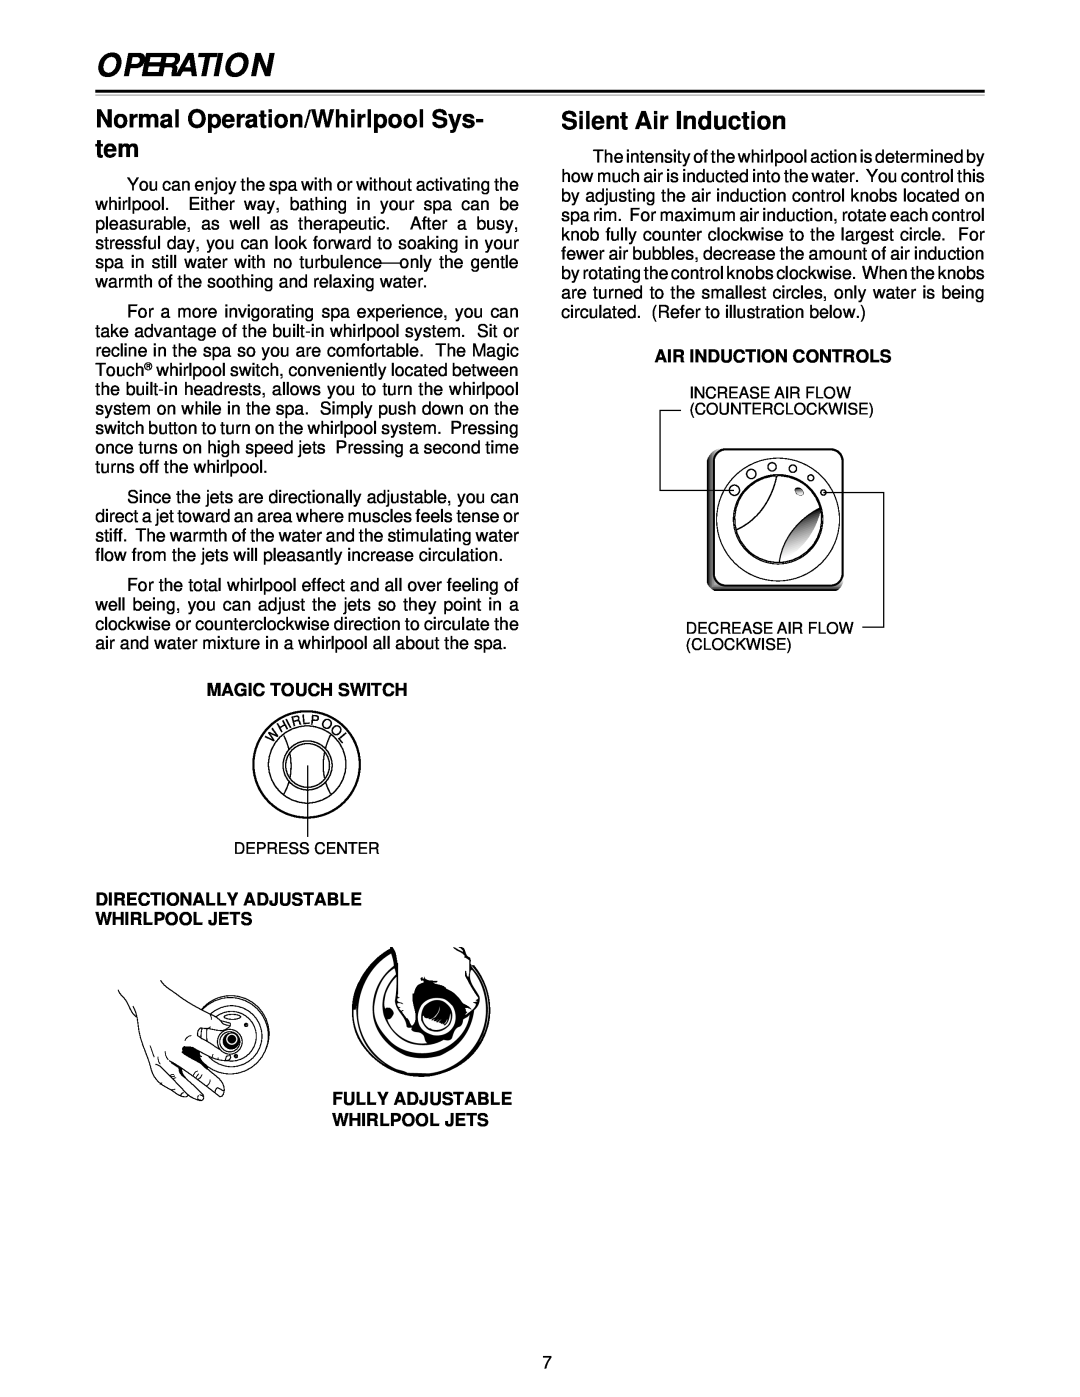 Jacuzzi Z101 owner manual Normal Operation/Whirlpool Sys- tem, Silent Air Induction 